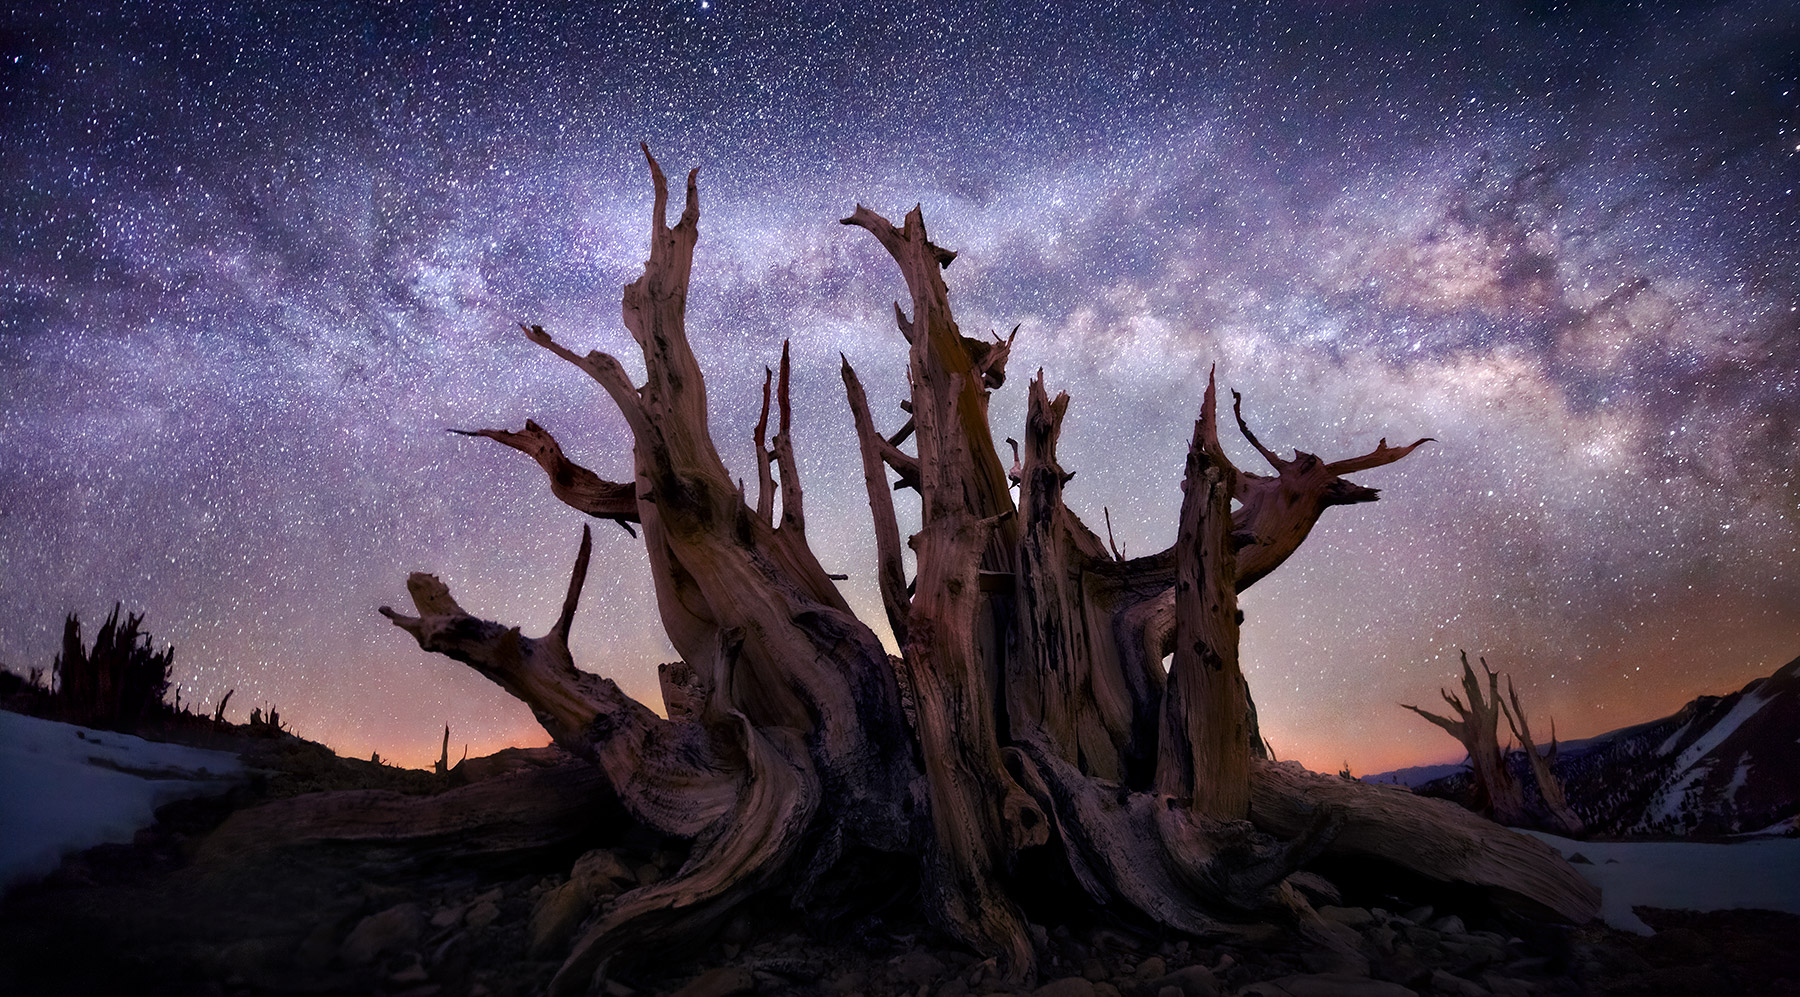 This is a 150-degree field of view across the milky way over an ancient, 5-meter wide Bristlecone Pine, the oldest living things...